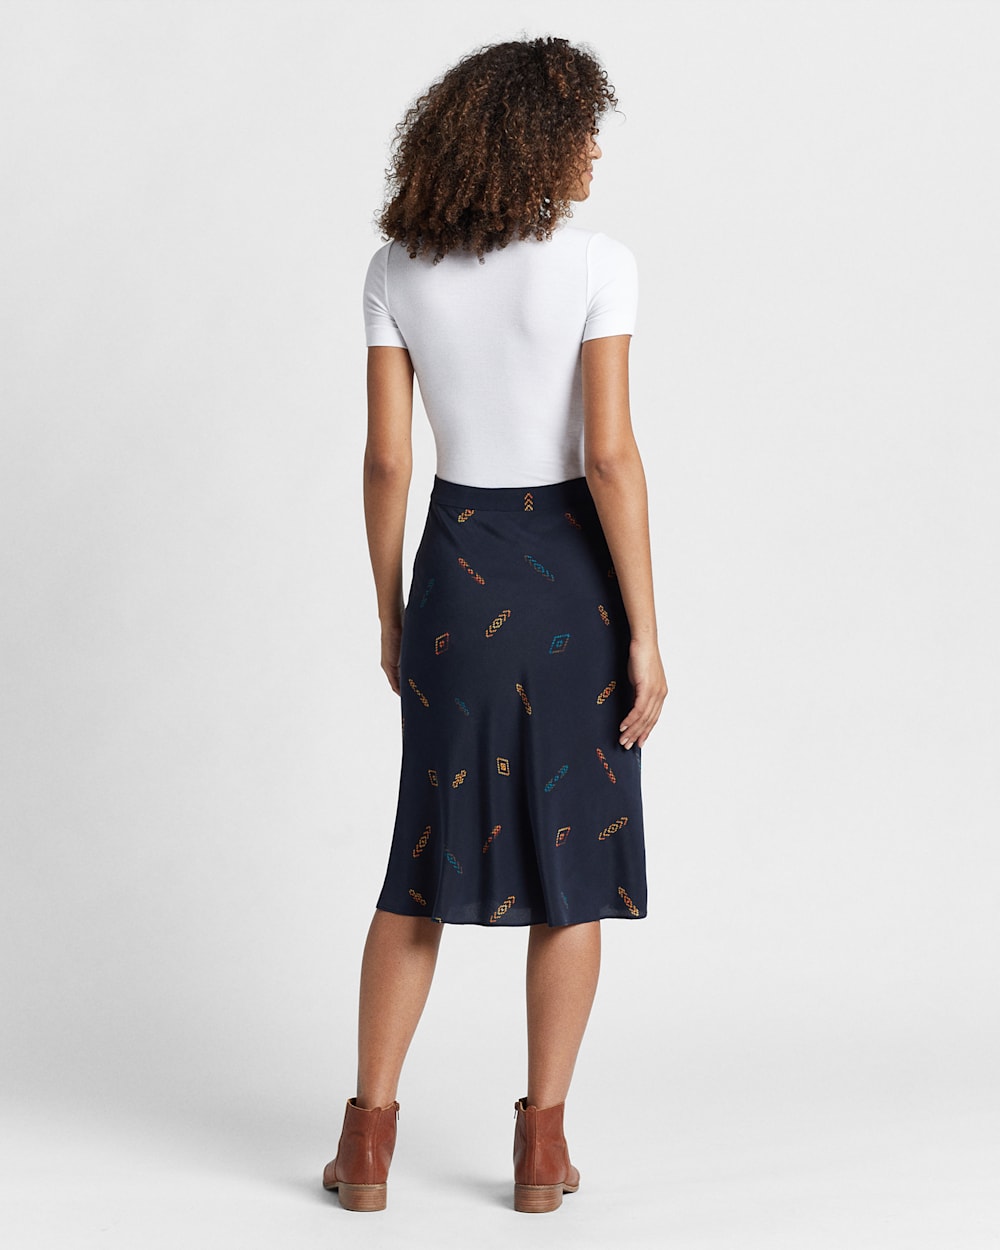 ALTERNATE VIEW OF WASHABLE SILK MIDI SKIRT IN MIDNIGHT NAVY MULTI image number 2